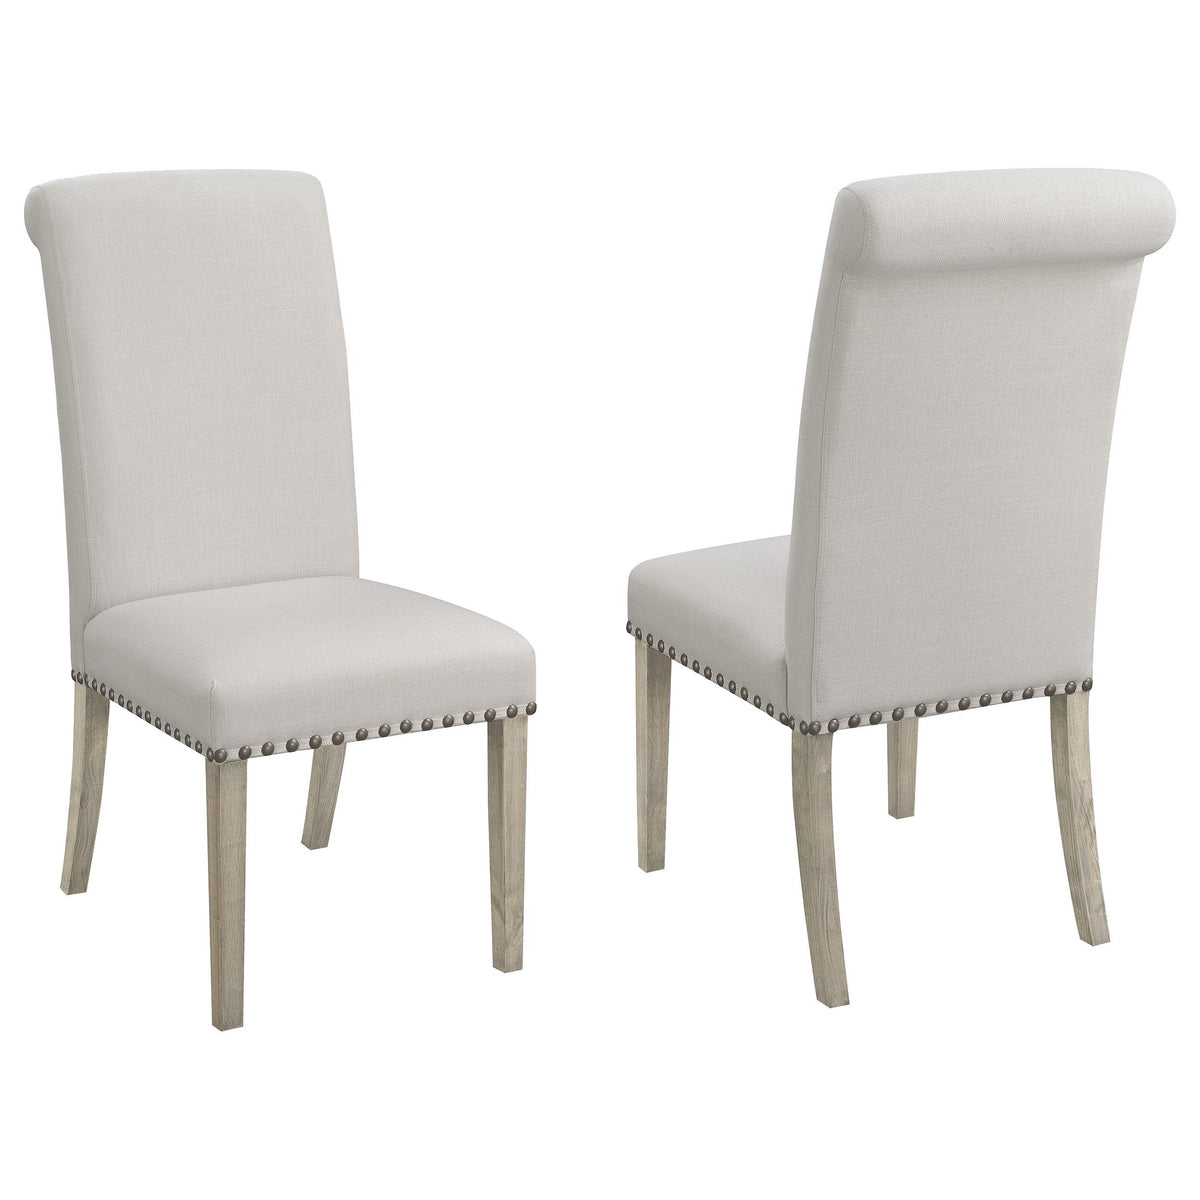 Salem Upholstered Side Chairs Rustic Smoke and Grey (Set of 2)  Half Price Furniture